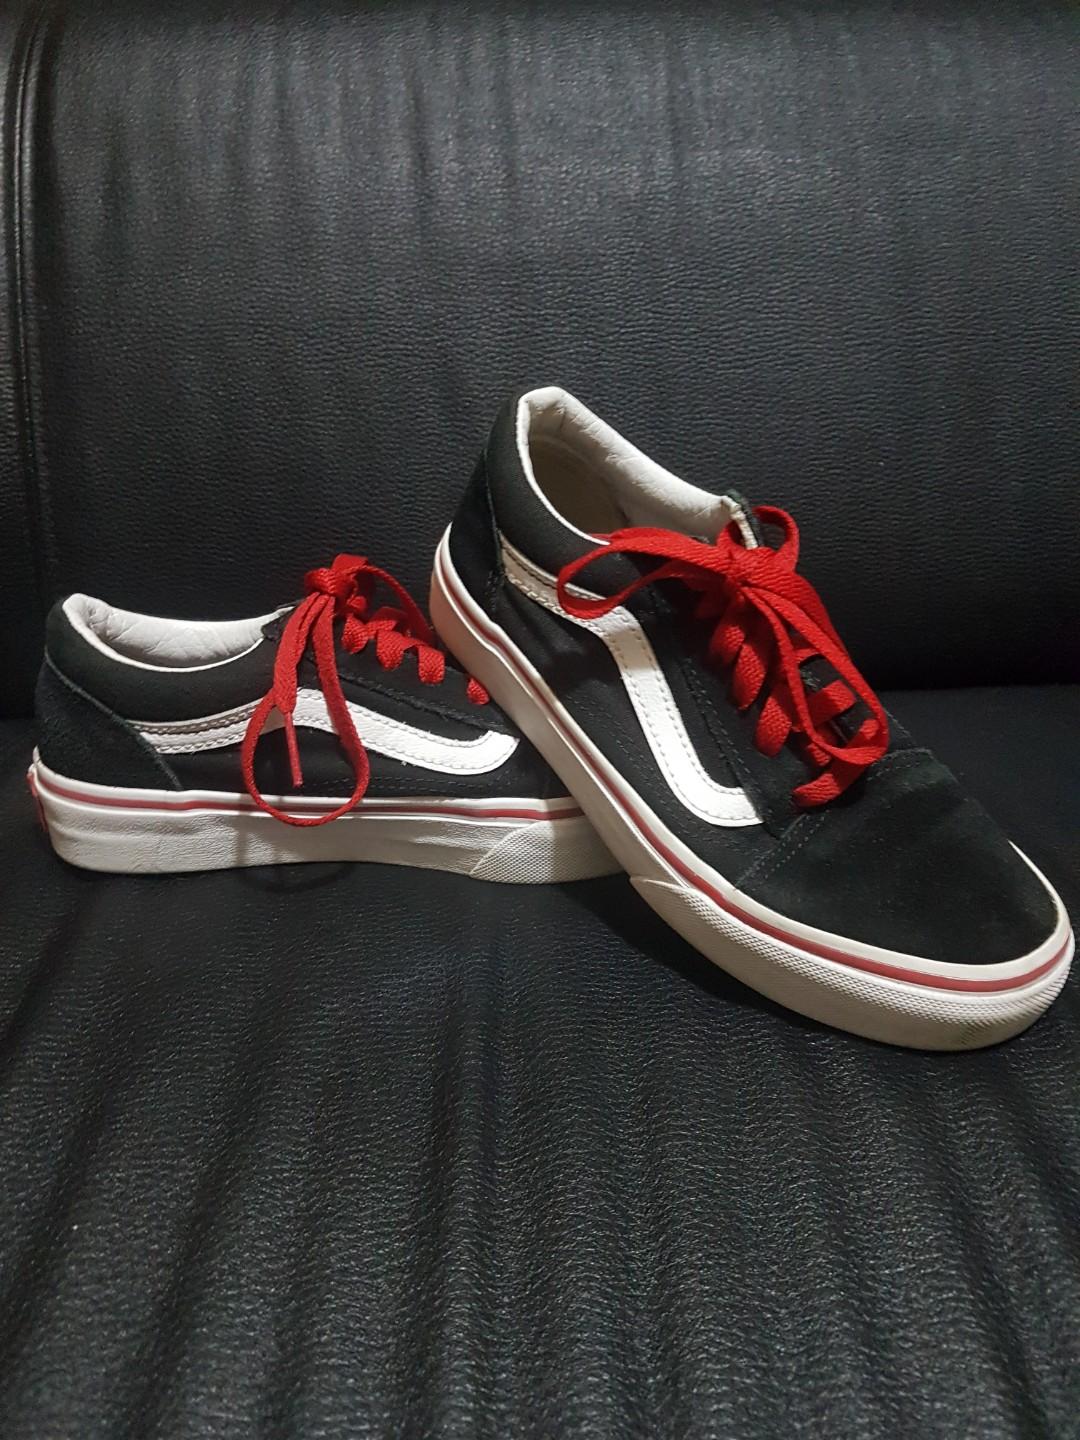 red vans laces, OFF 74%,Cheap price!